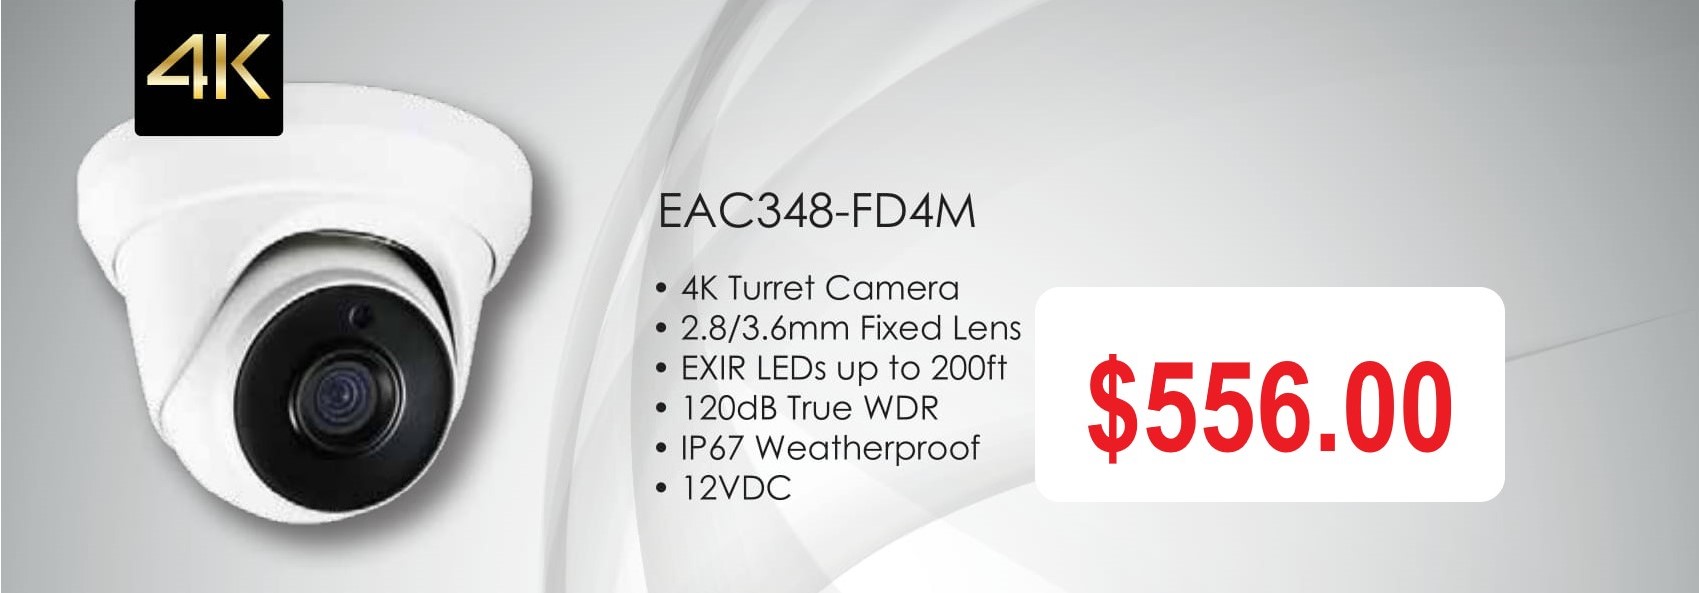 4k1-2 New Promo Packages